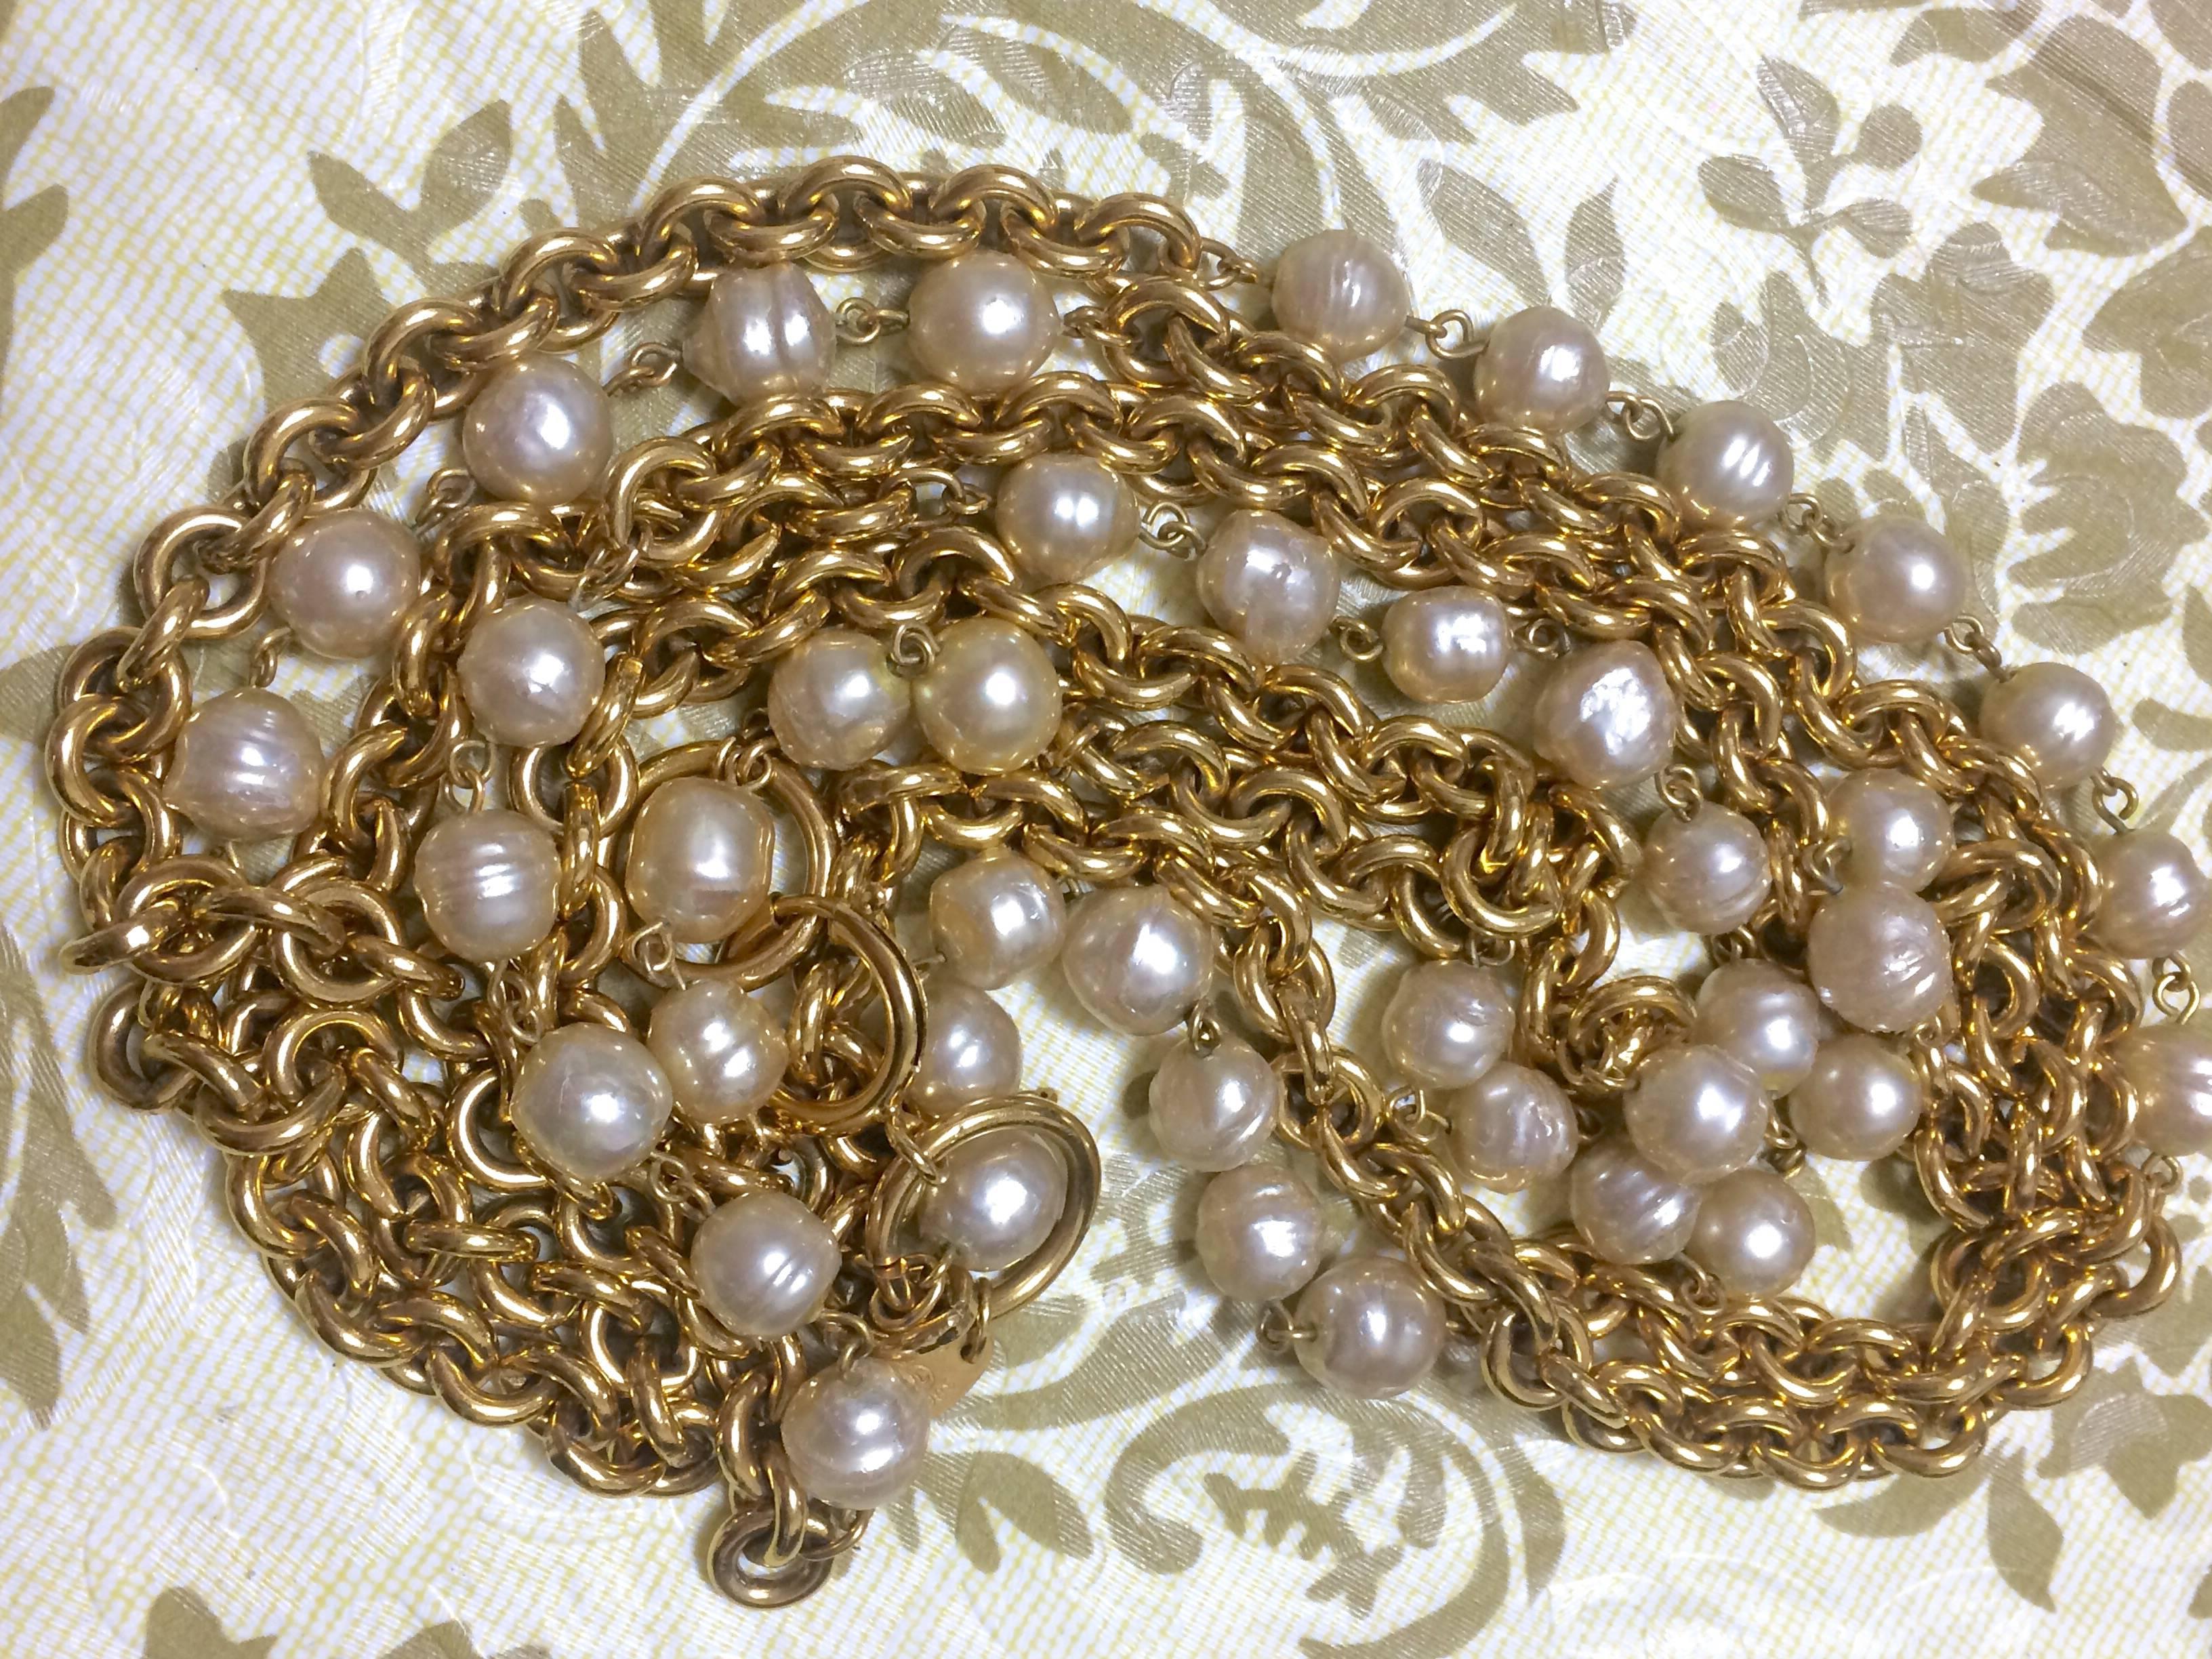  Vintage CHANEL double layer long chain necklace with baroque faux pearls. 3